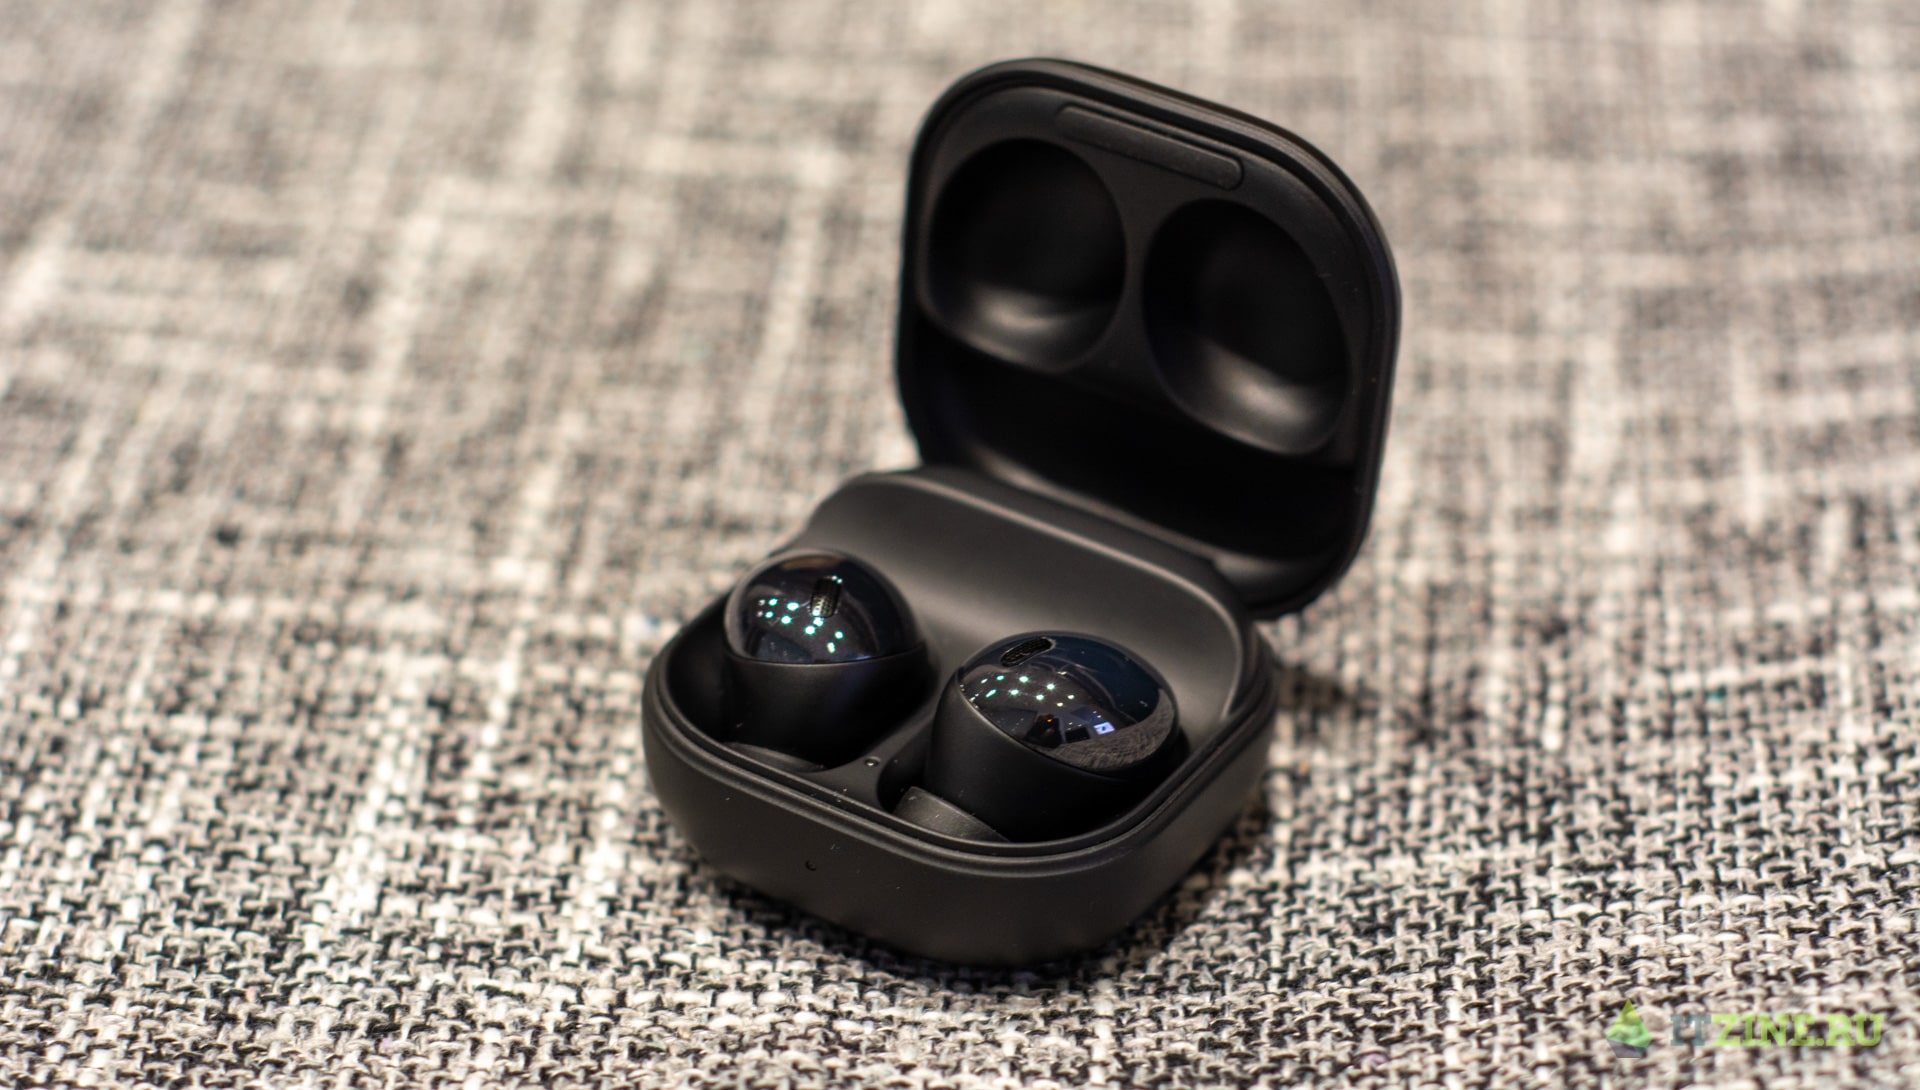 Galaxy Buds Pro received an update even before launch